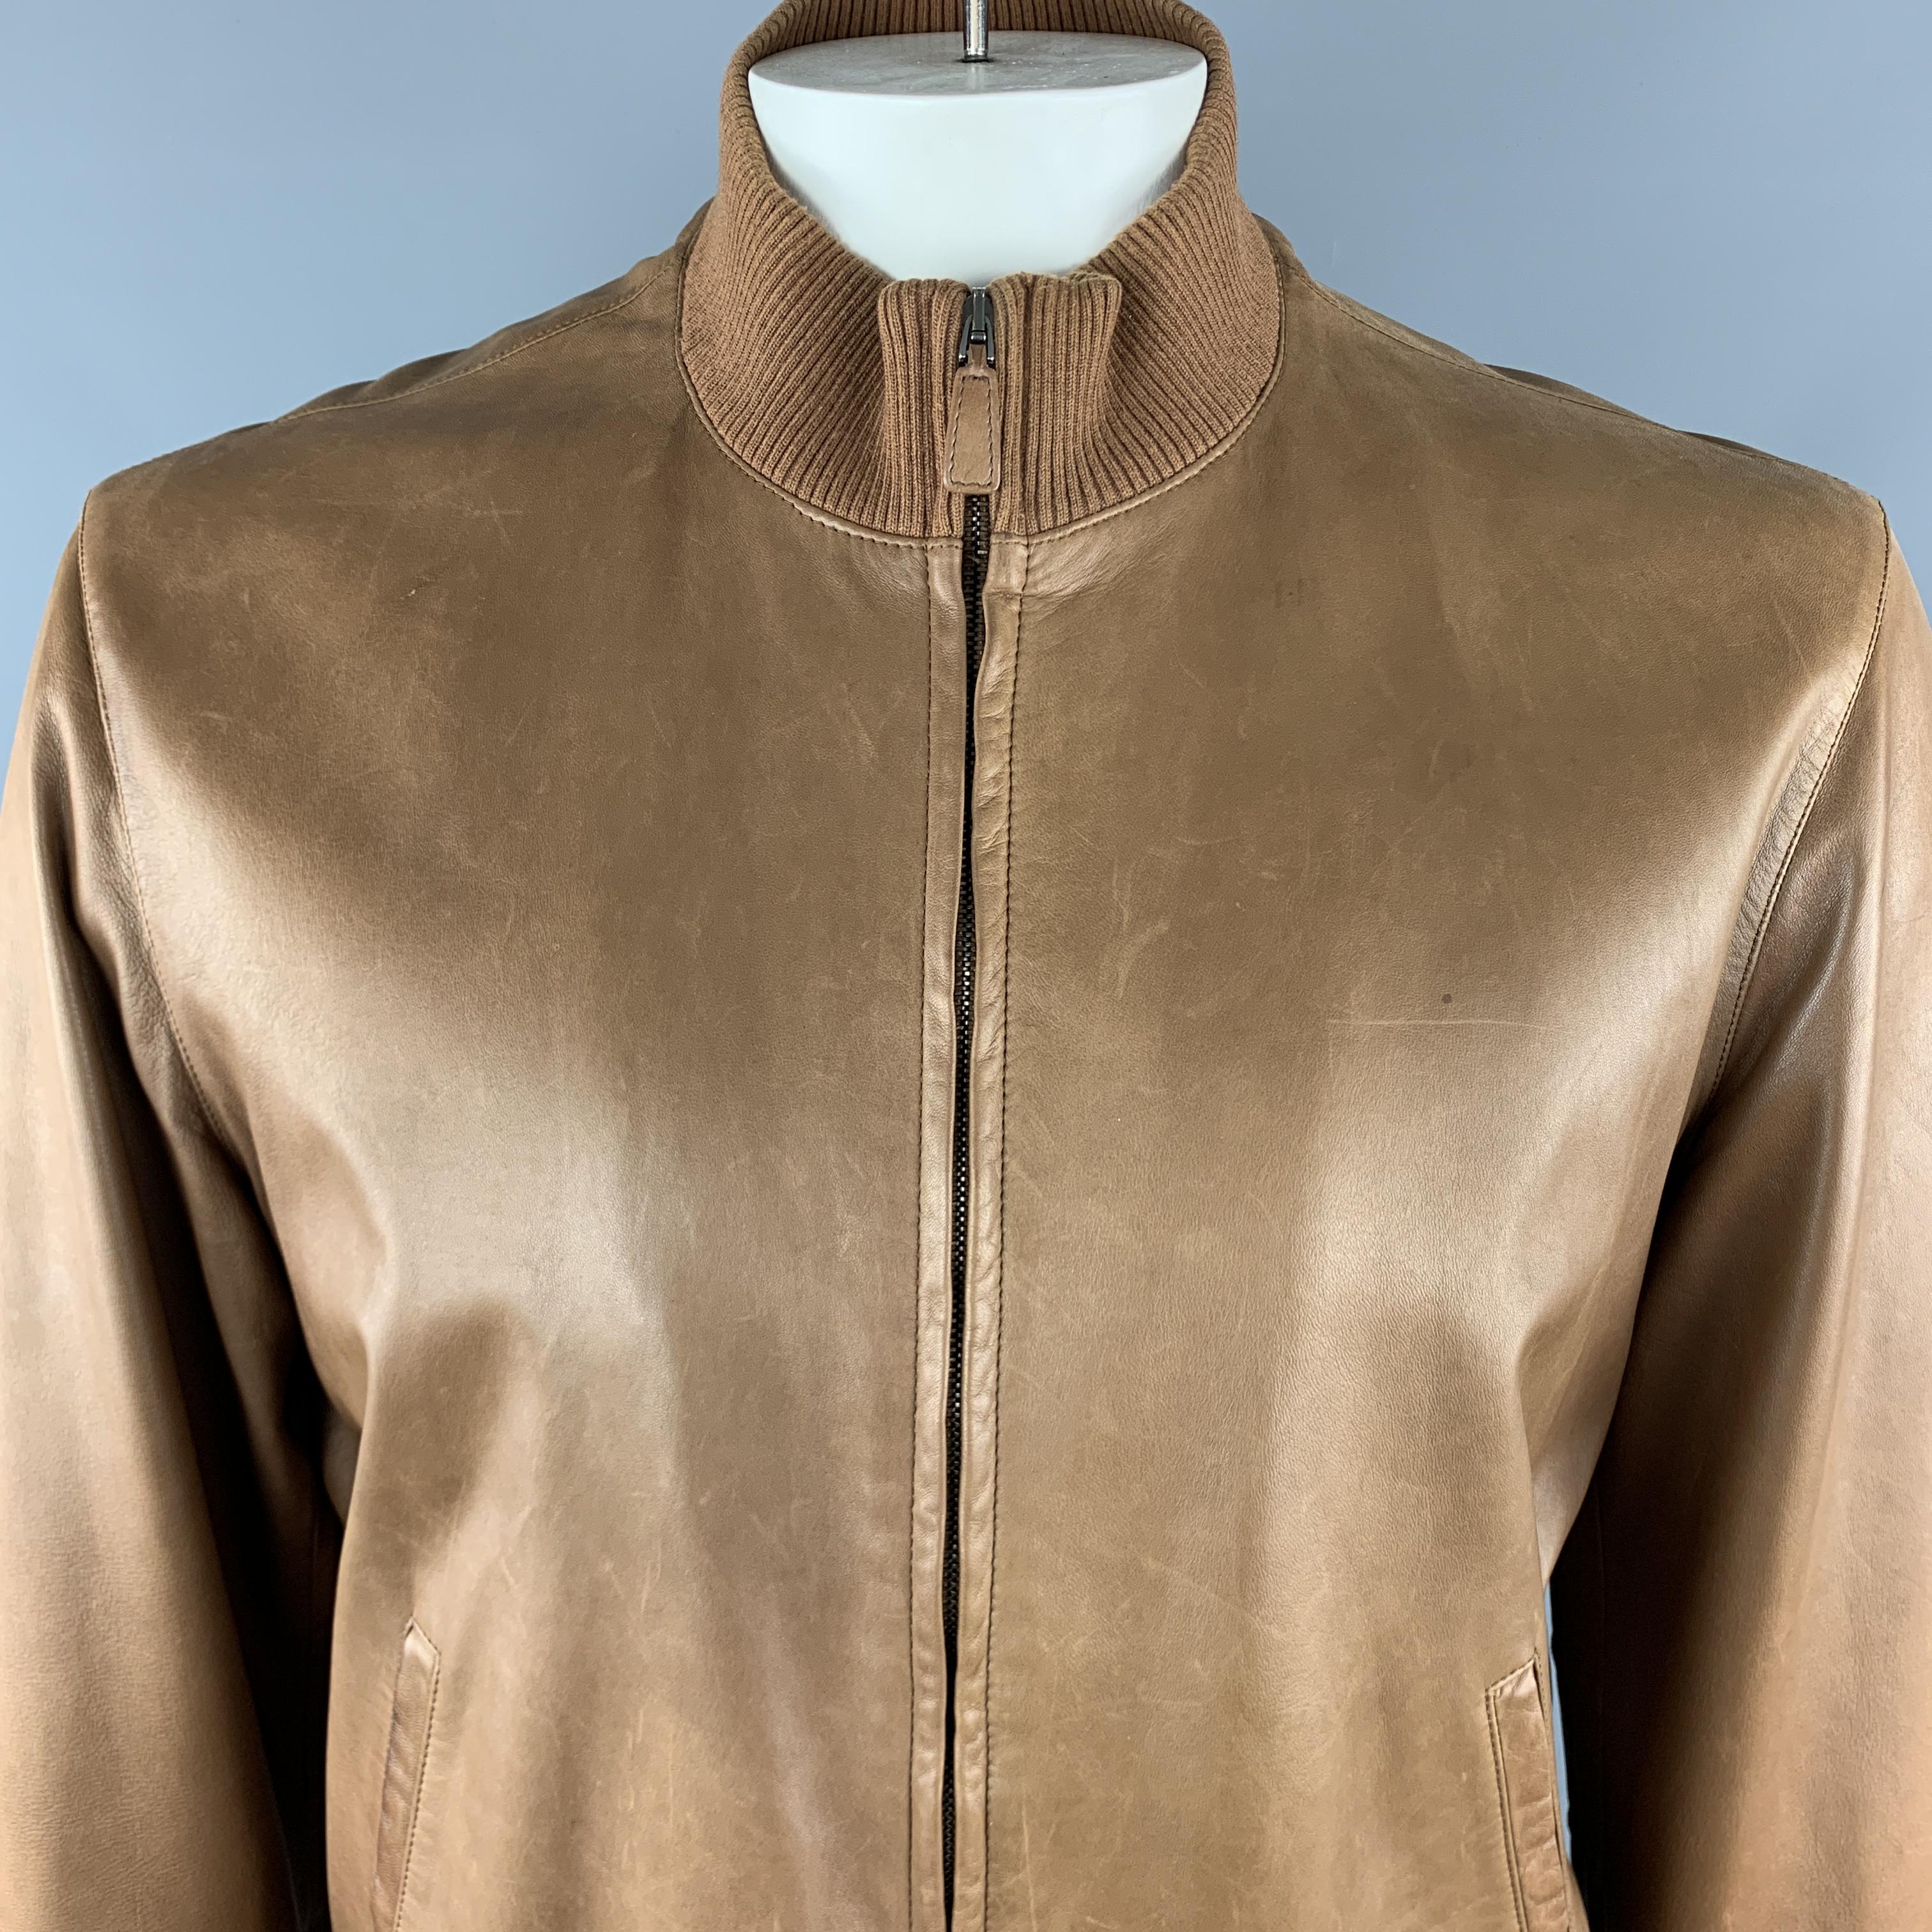 RALPH LAUREN PURPLE LABEL Bomber Style Jacket comes in a tan tone in a solid leather material, with a high collar, zip up, slit pockets, internal pockets and ribbed cuffs and hem. As Is. Made in Italy.

Very Good Pre-Owned Condition.
Marked: